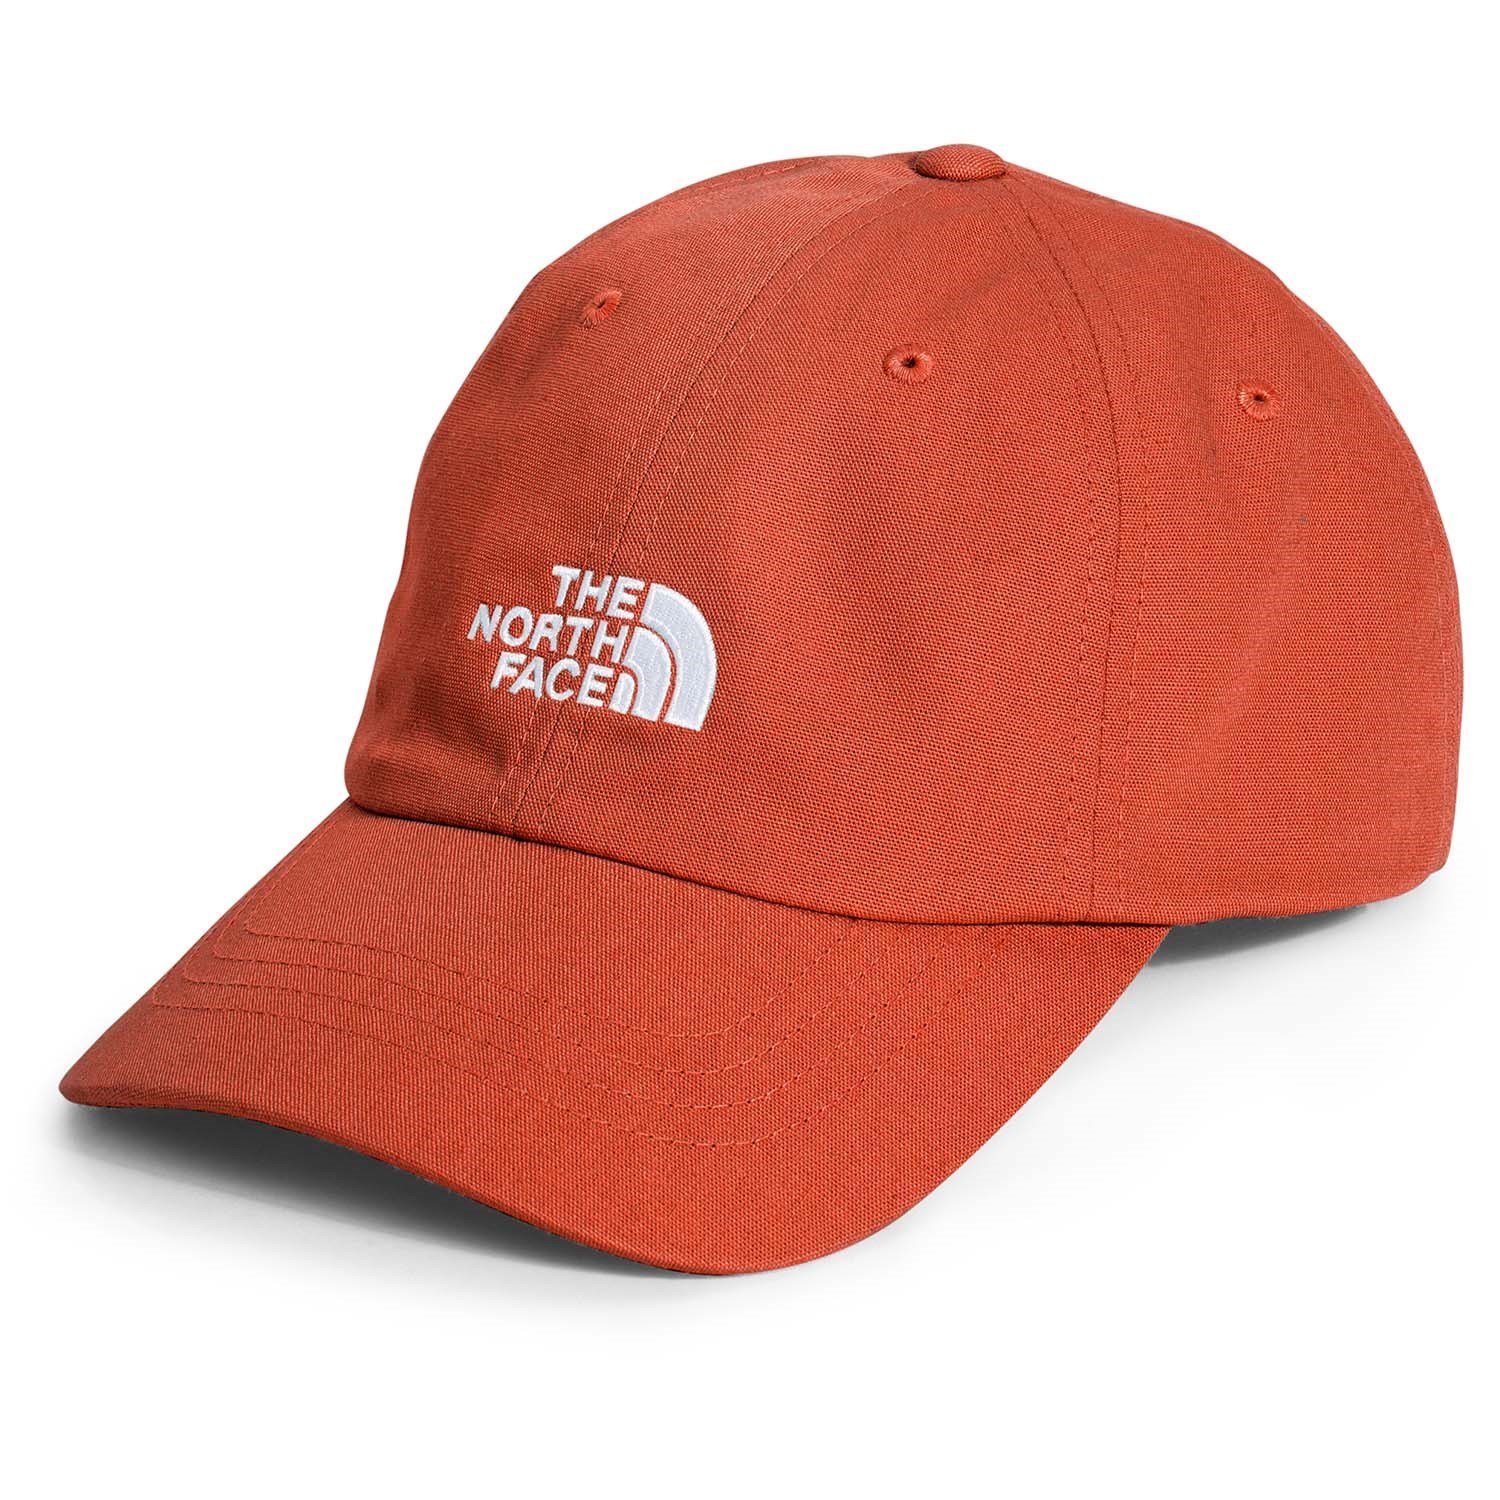 The North Face Norm Hat | evo